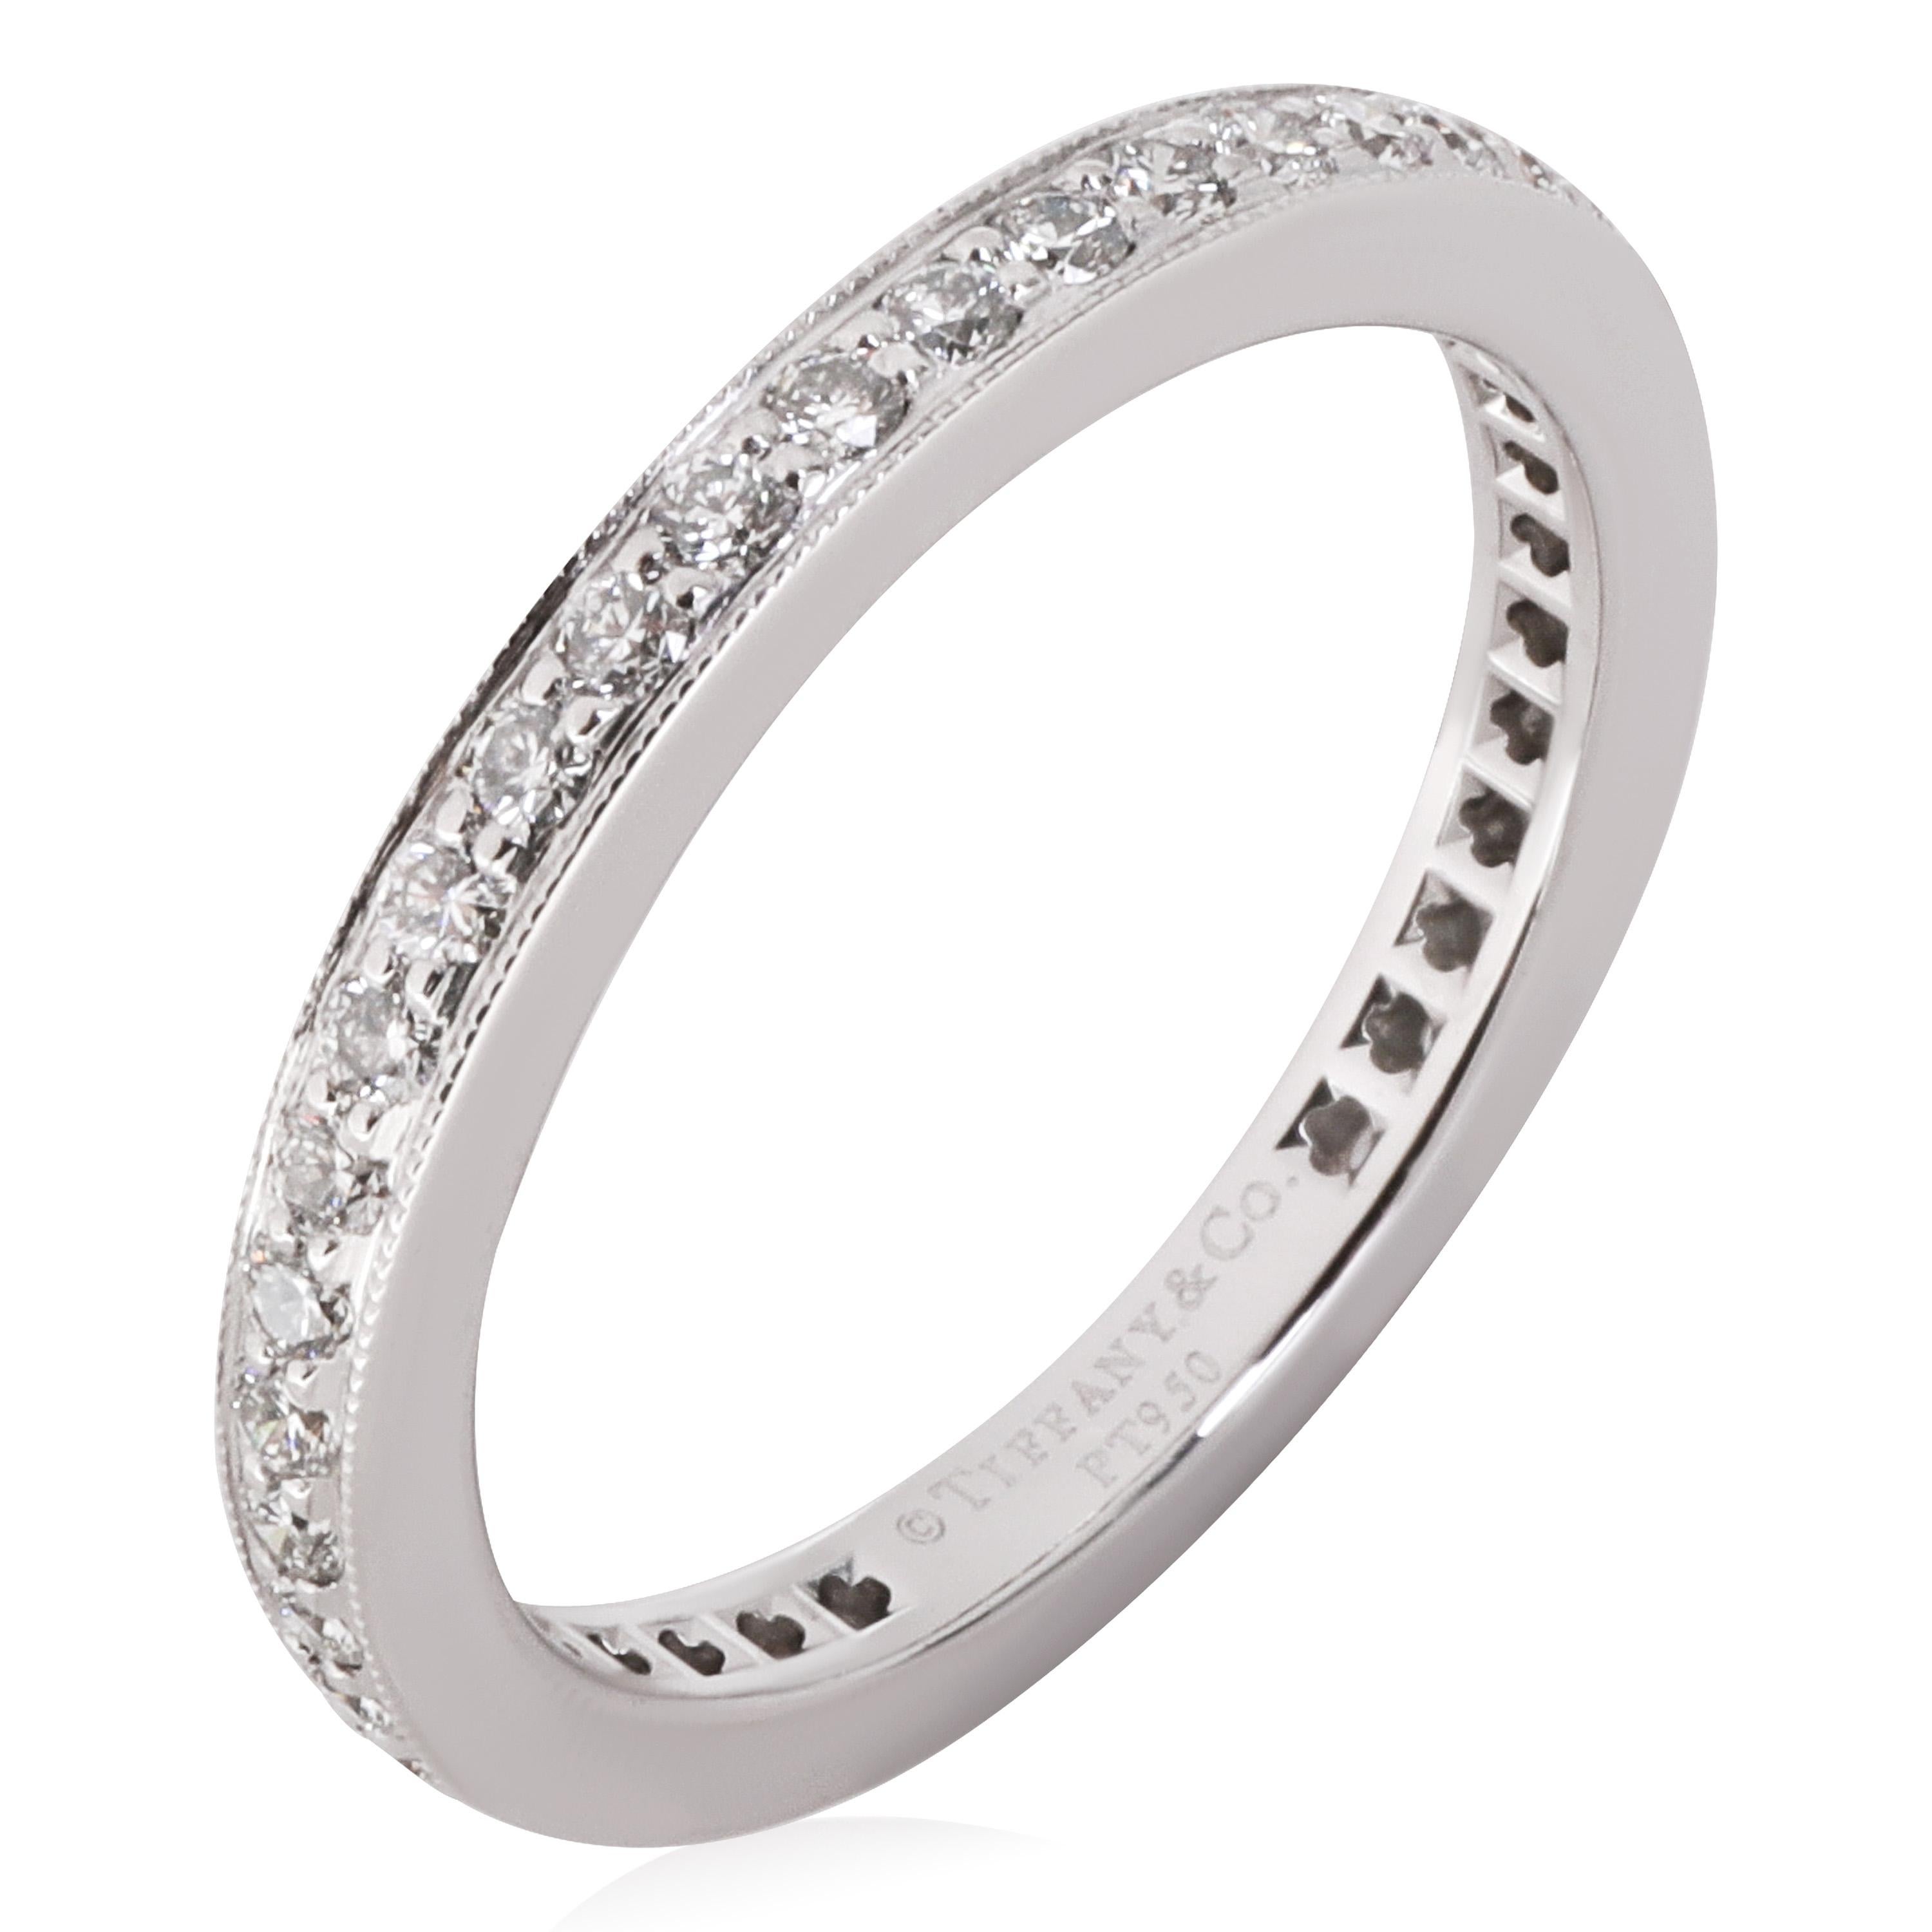 Tiffany & Co. Legacy Diamond Eternity Band in Platinum 0.45 CTW

PRIMARY DETAILS
SKU: 119169
Listing Title: Tiffany & Co. Legacy Diamond Eternity Band in Platinum 0.45 CTW
Condition Description: Retails for 4350 USD. In excellent condition and